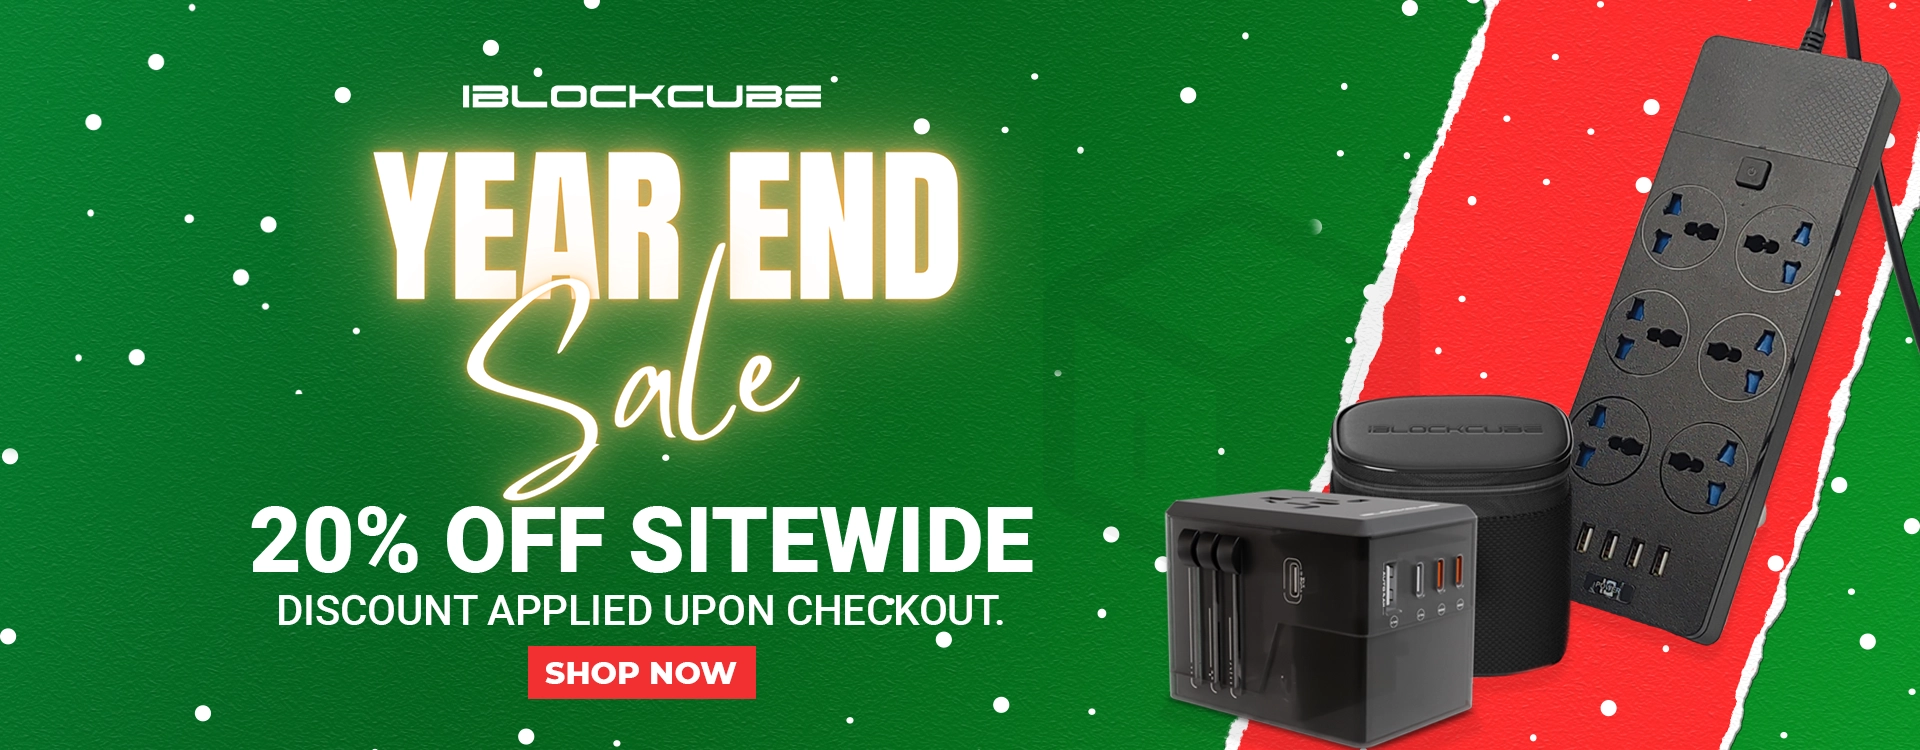 iBlockCube's Year End Sale